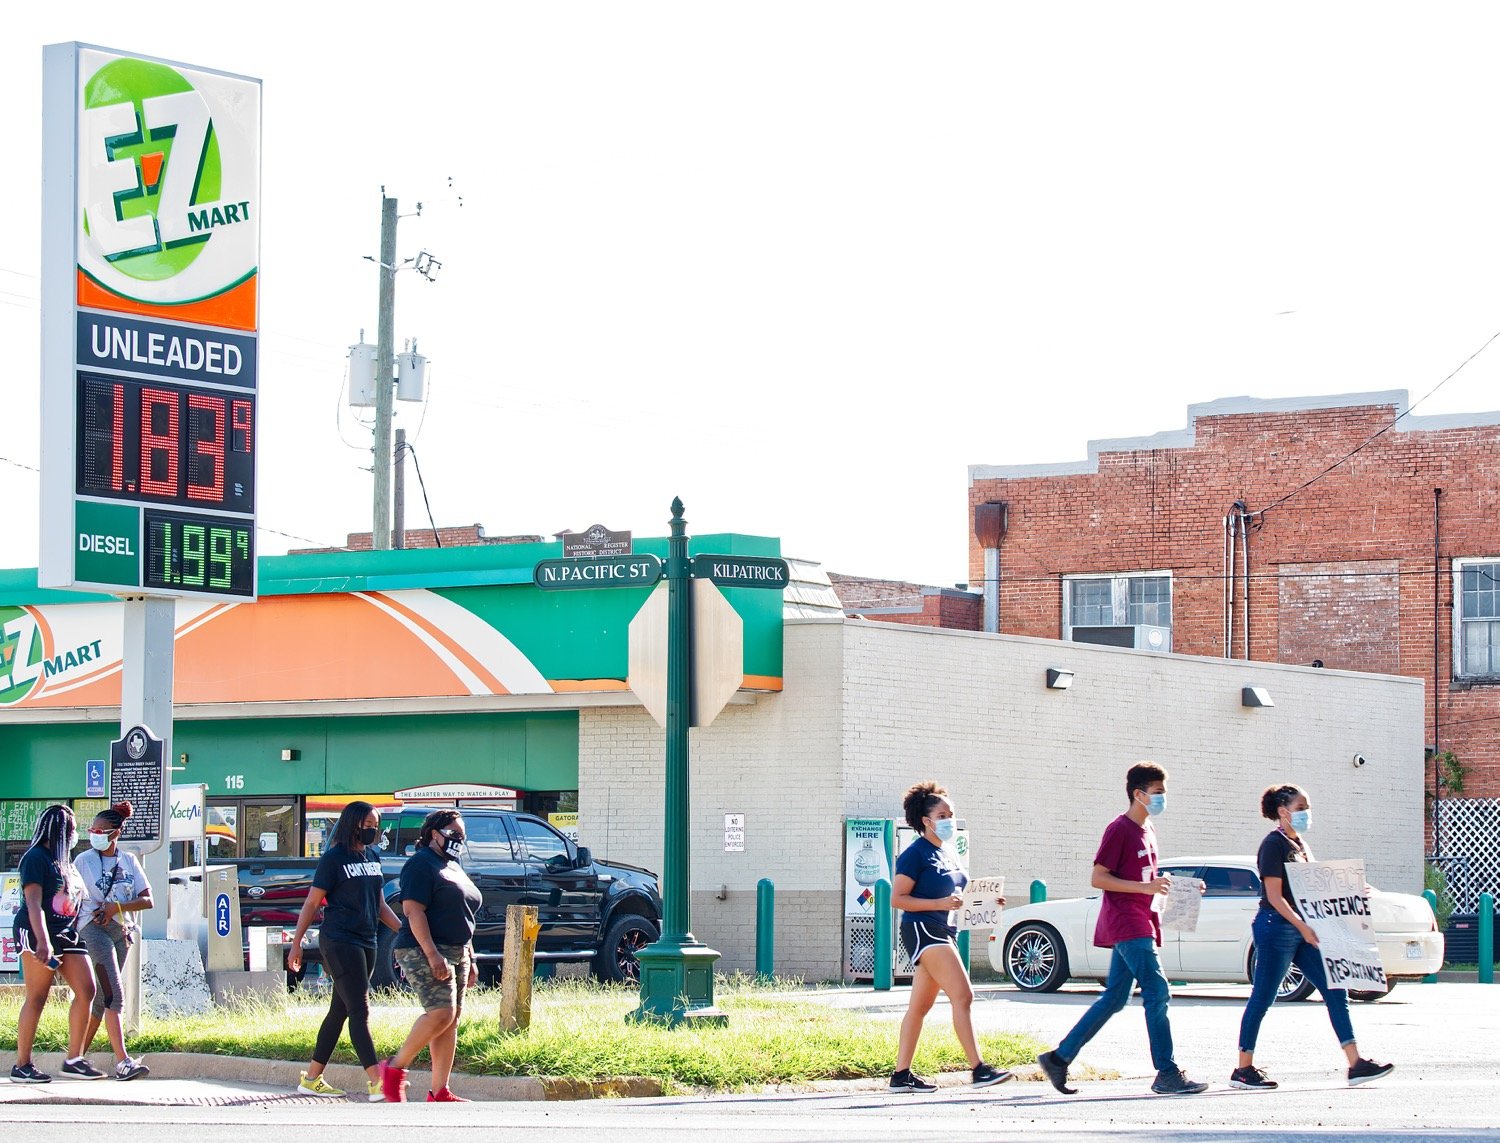 The marchers proceed past the old 7-11, near the location of Chris Griffin's killing at the hand of law enforcement.